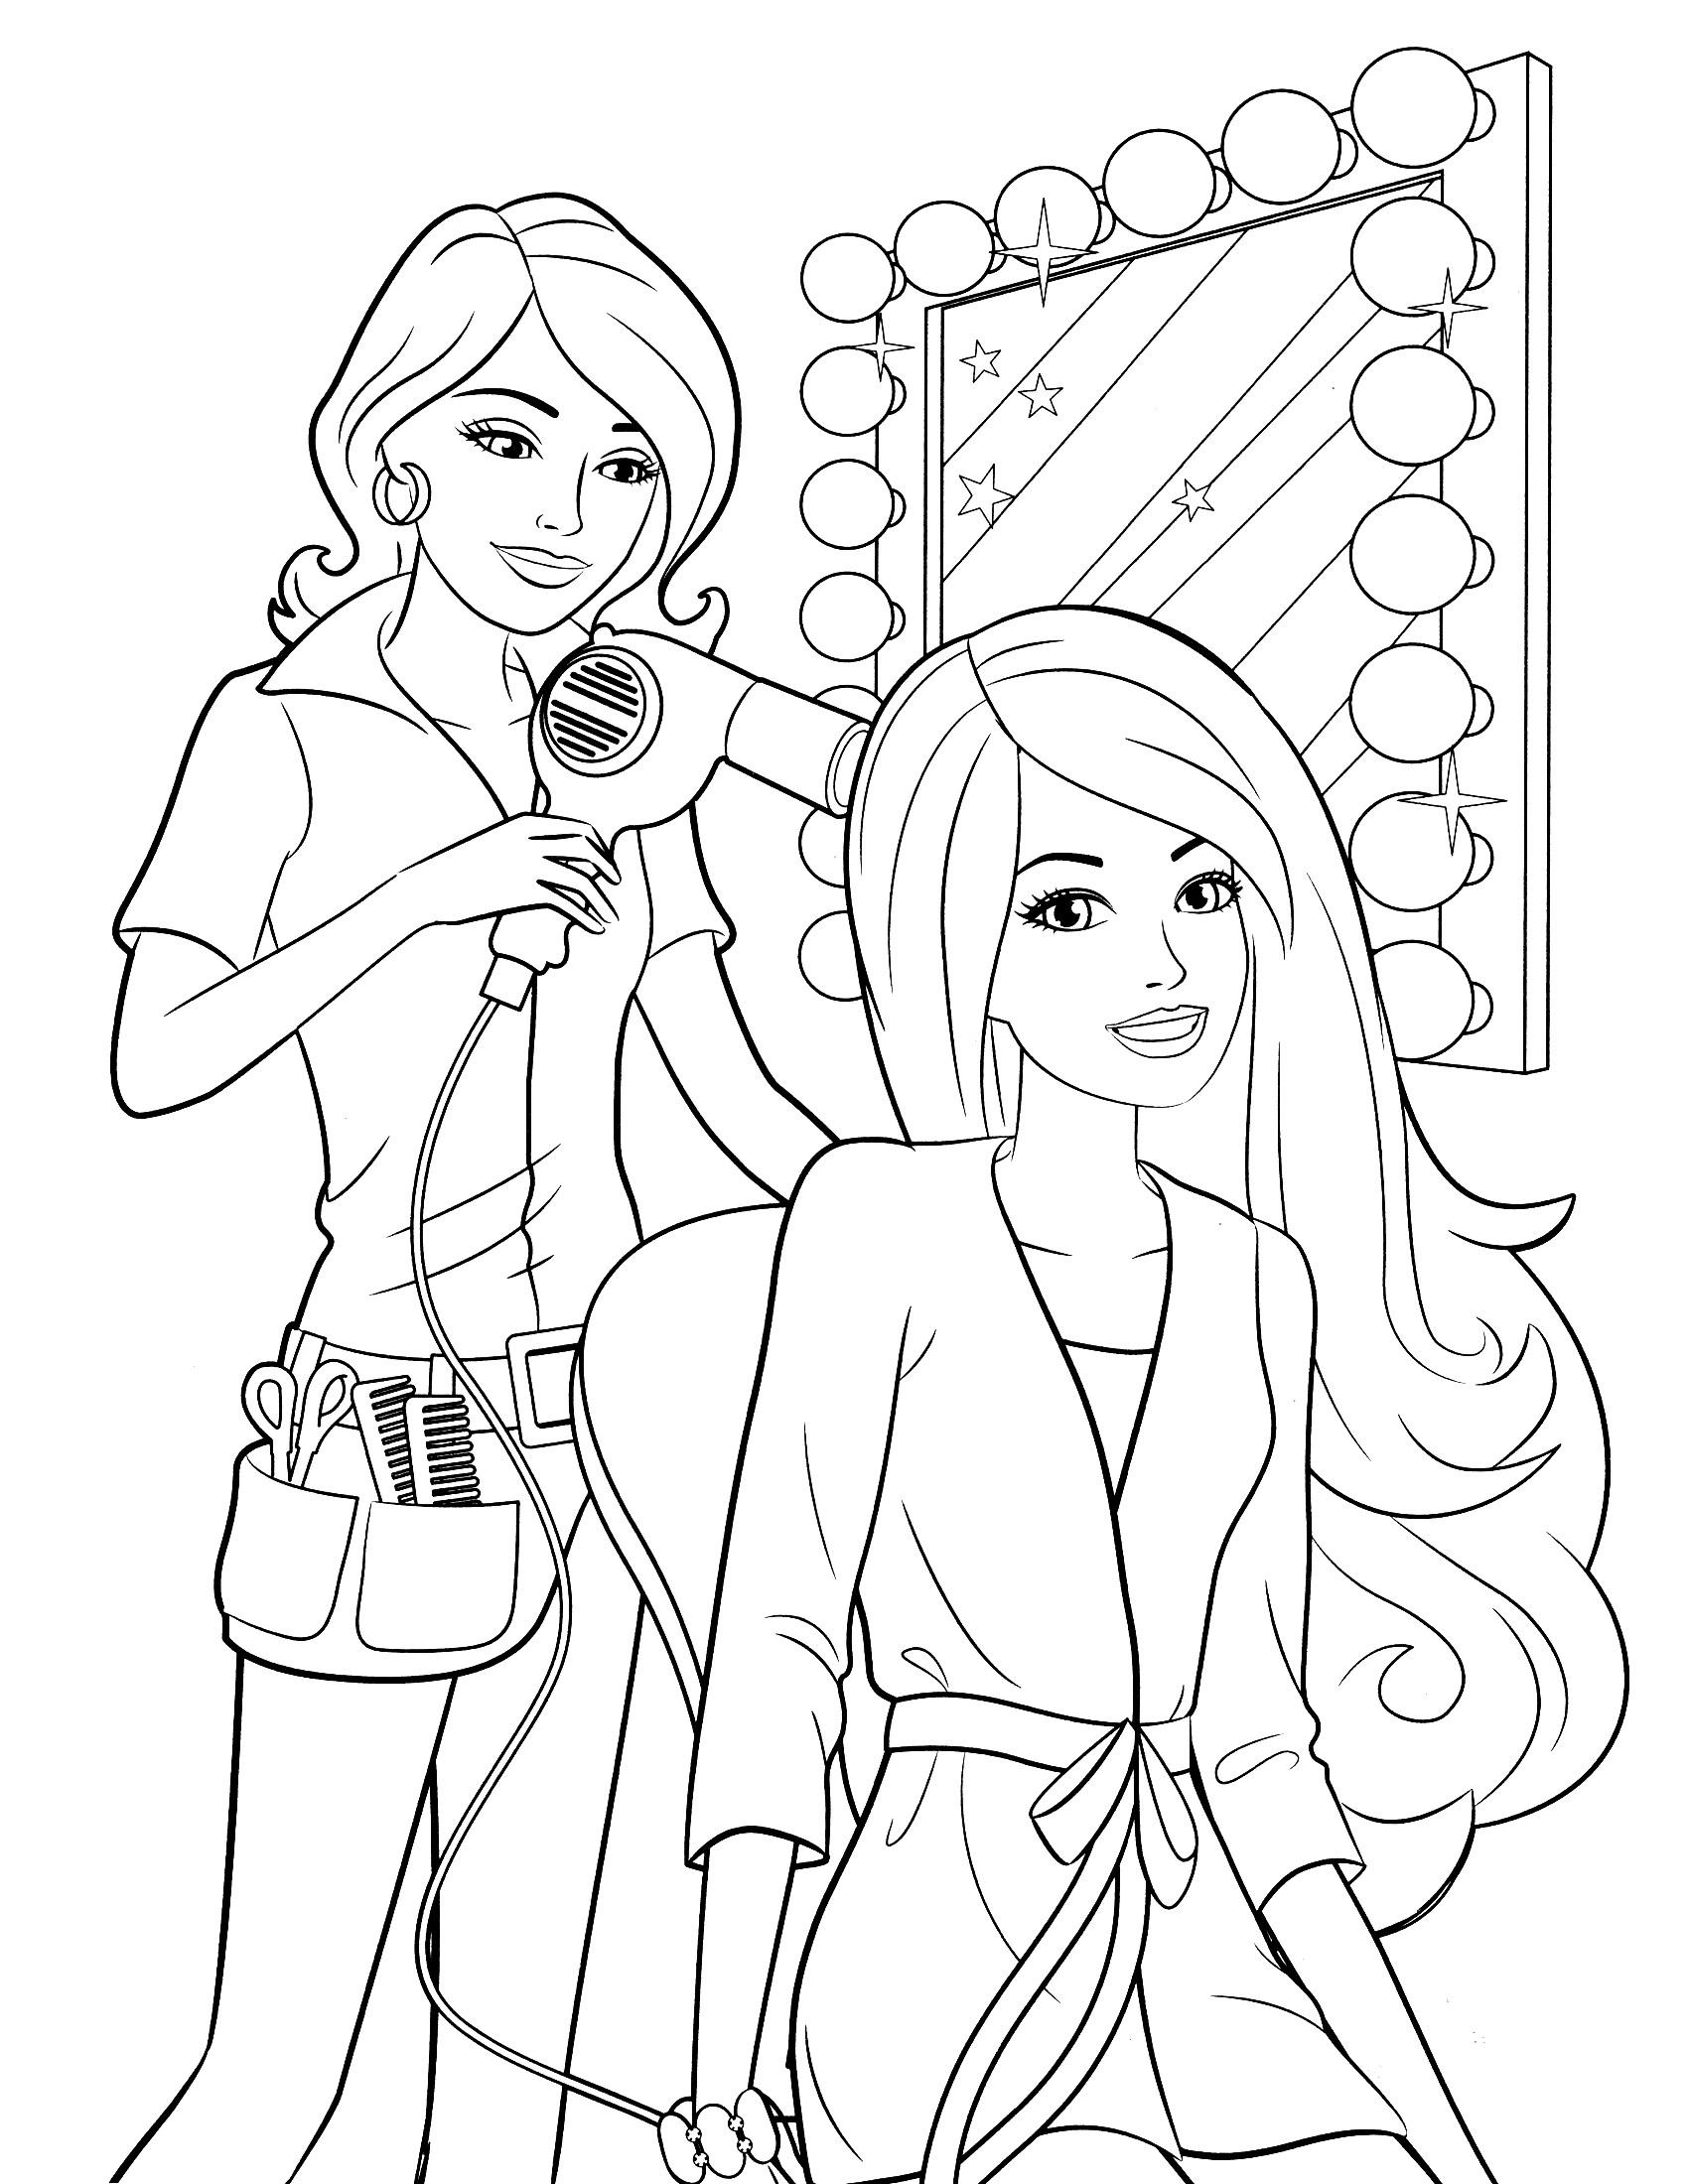 25 Ideas for Free Girls Coloring Pages – Home, Family, Style and Art Ideas